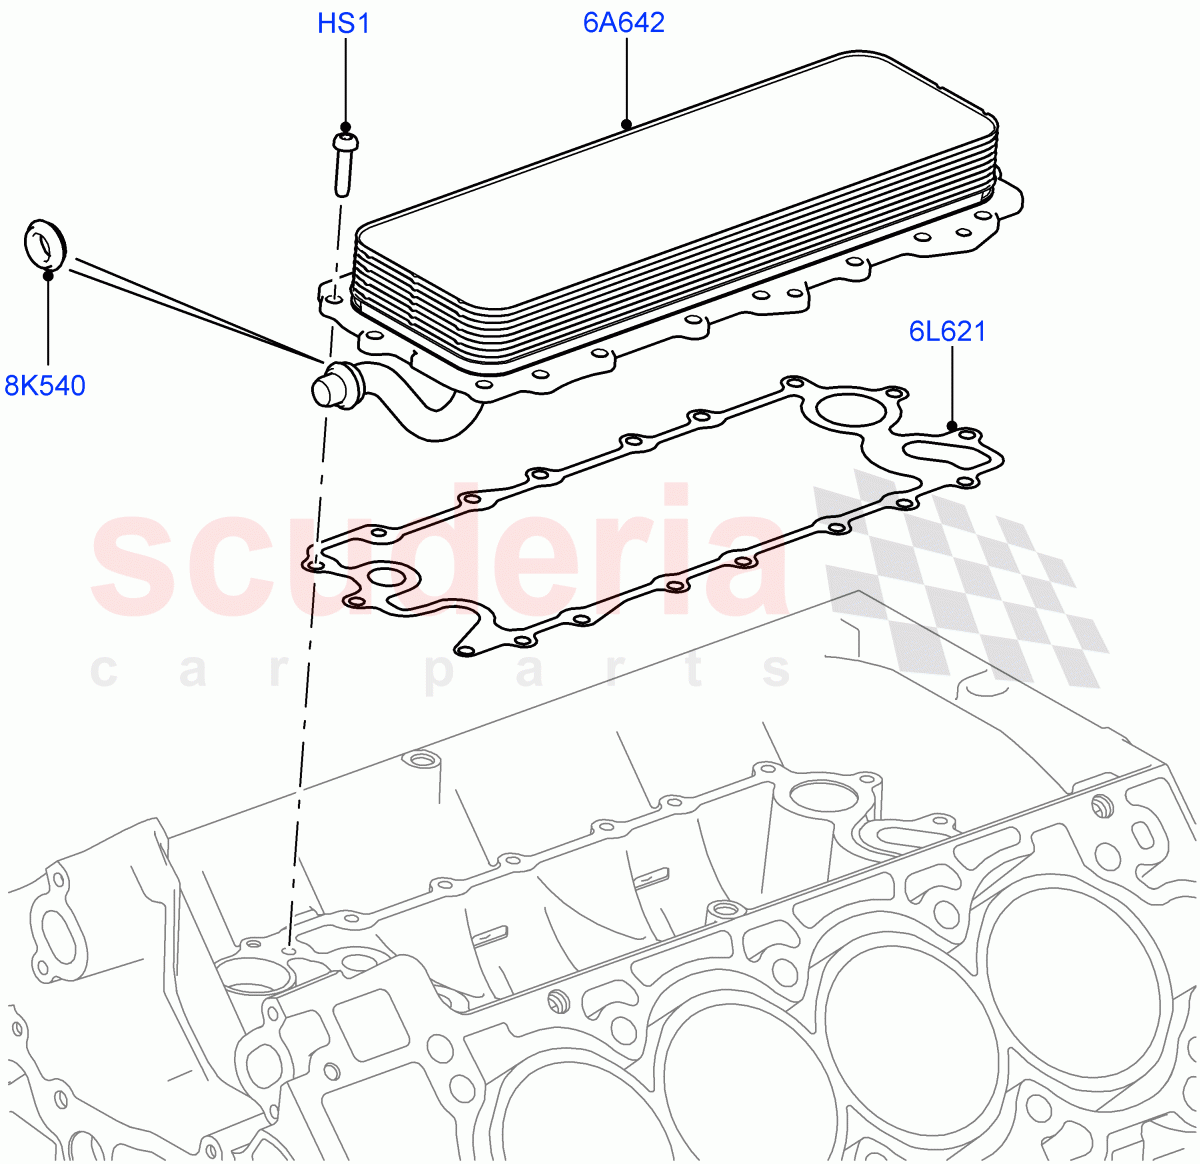 Oil Cooler And Filter(Oil Cooler)(5.0L OHC SGDI SC V8 Petrol - AJ133,5.0 Petrol AJ133 DOHC CDA,5.0L P AJ133 DOHC CDA S/C Enhanced)((V)FROMAA000001) of Land Rover Land Rover Range Rover (2012-2021) [5.0 OHC SGDI SC V8 Petrol]